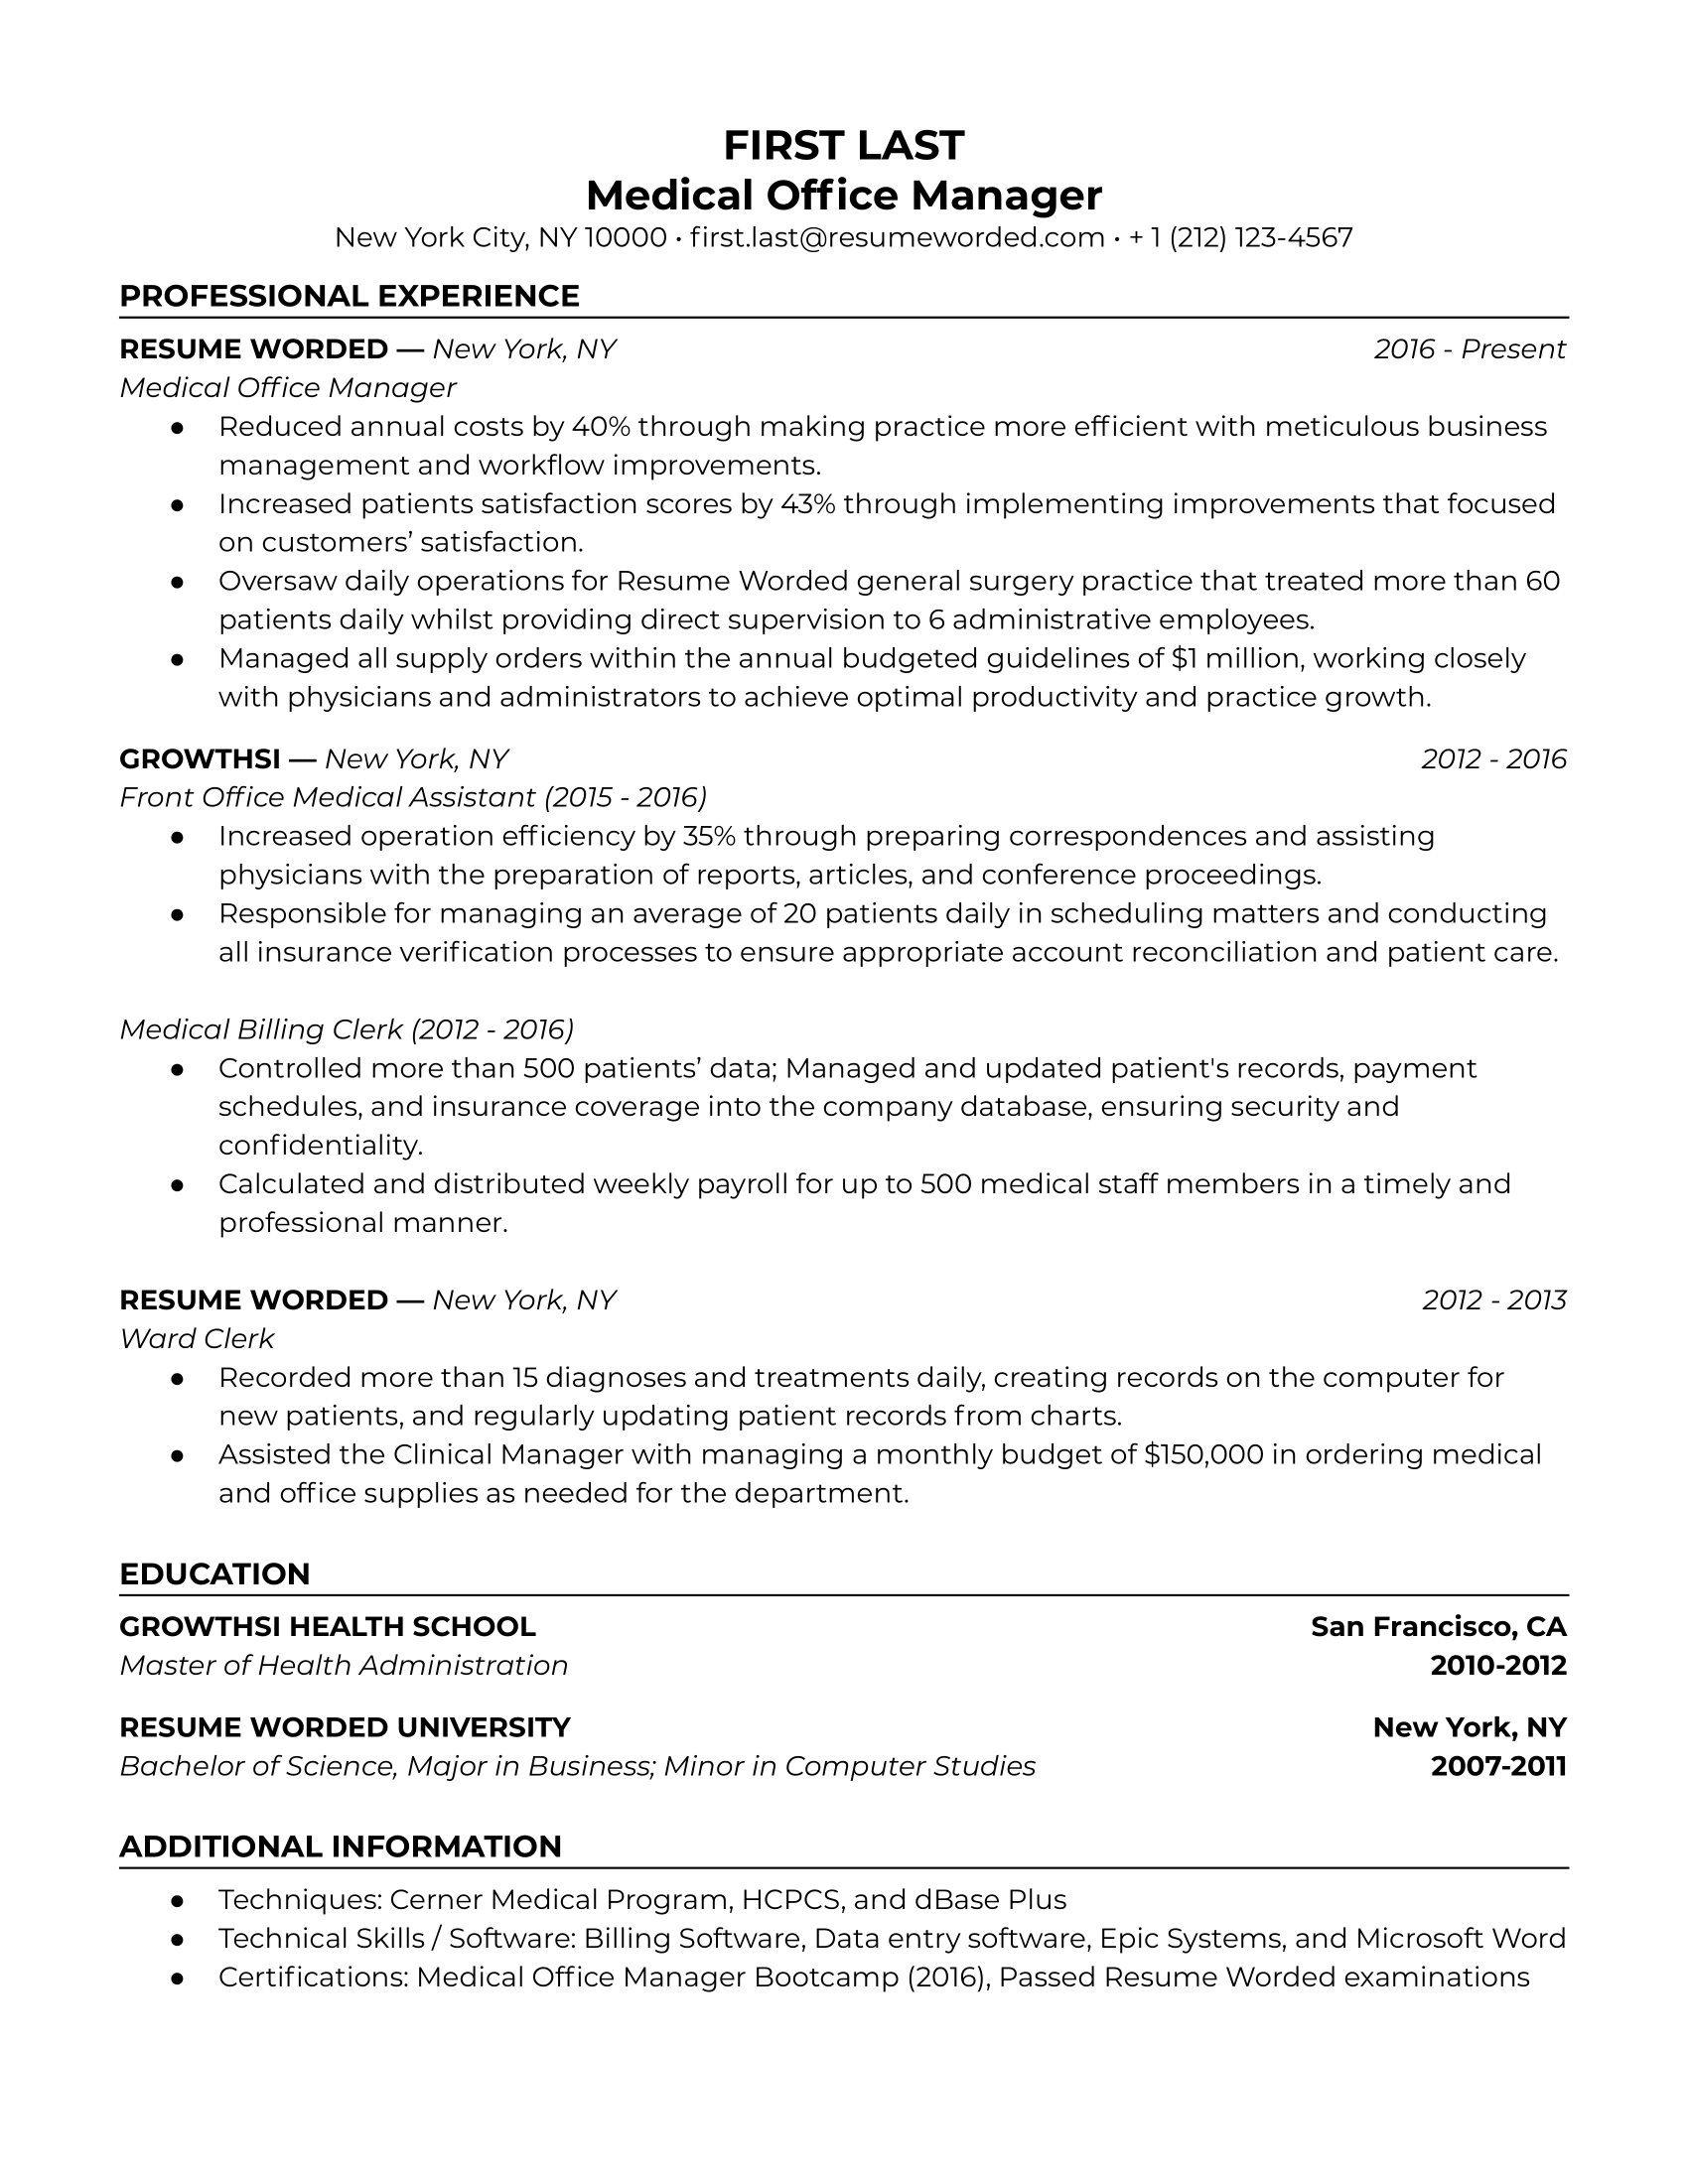 Medical Office Manager Resume Template + Example